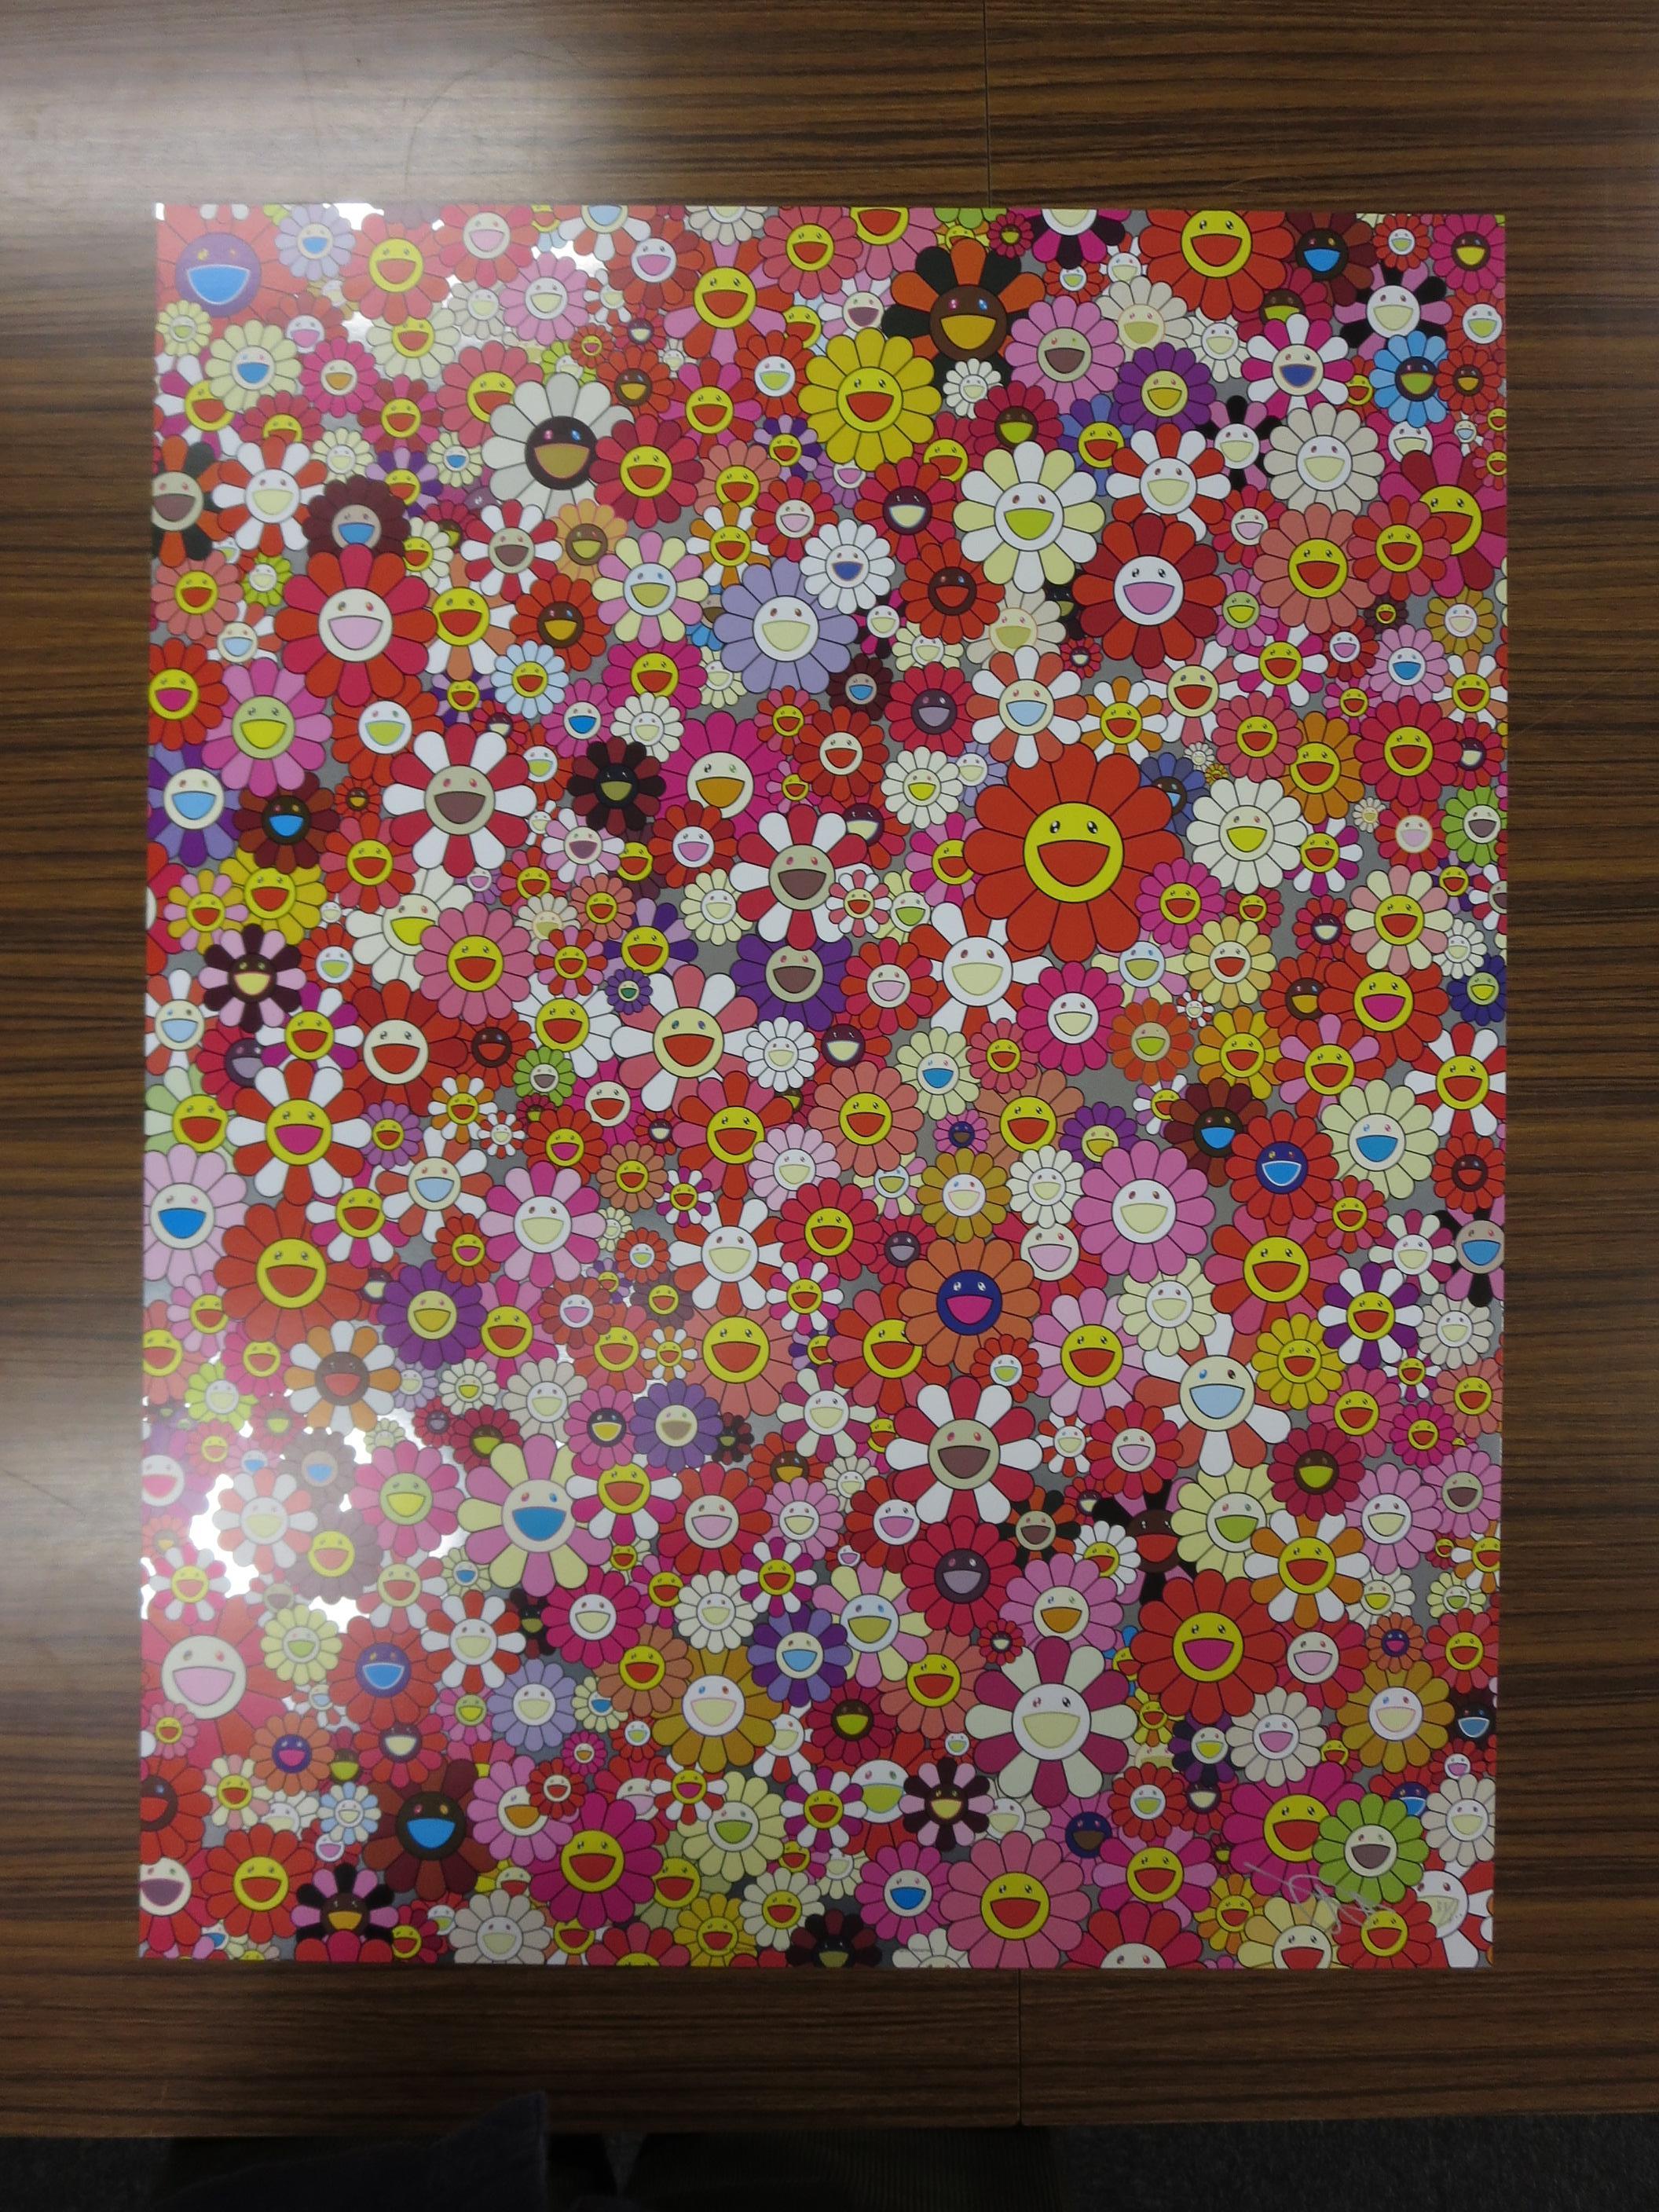 An Homage to Monopink, 1960E. Limited Edition (print) by Takashi Murakami signed 1